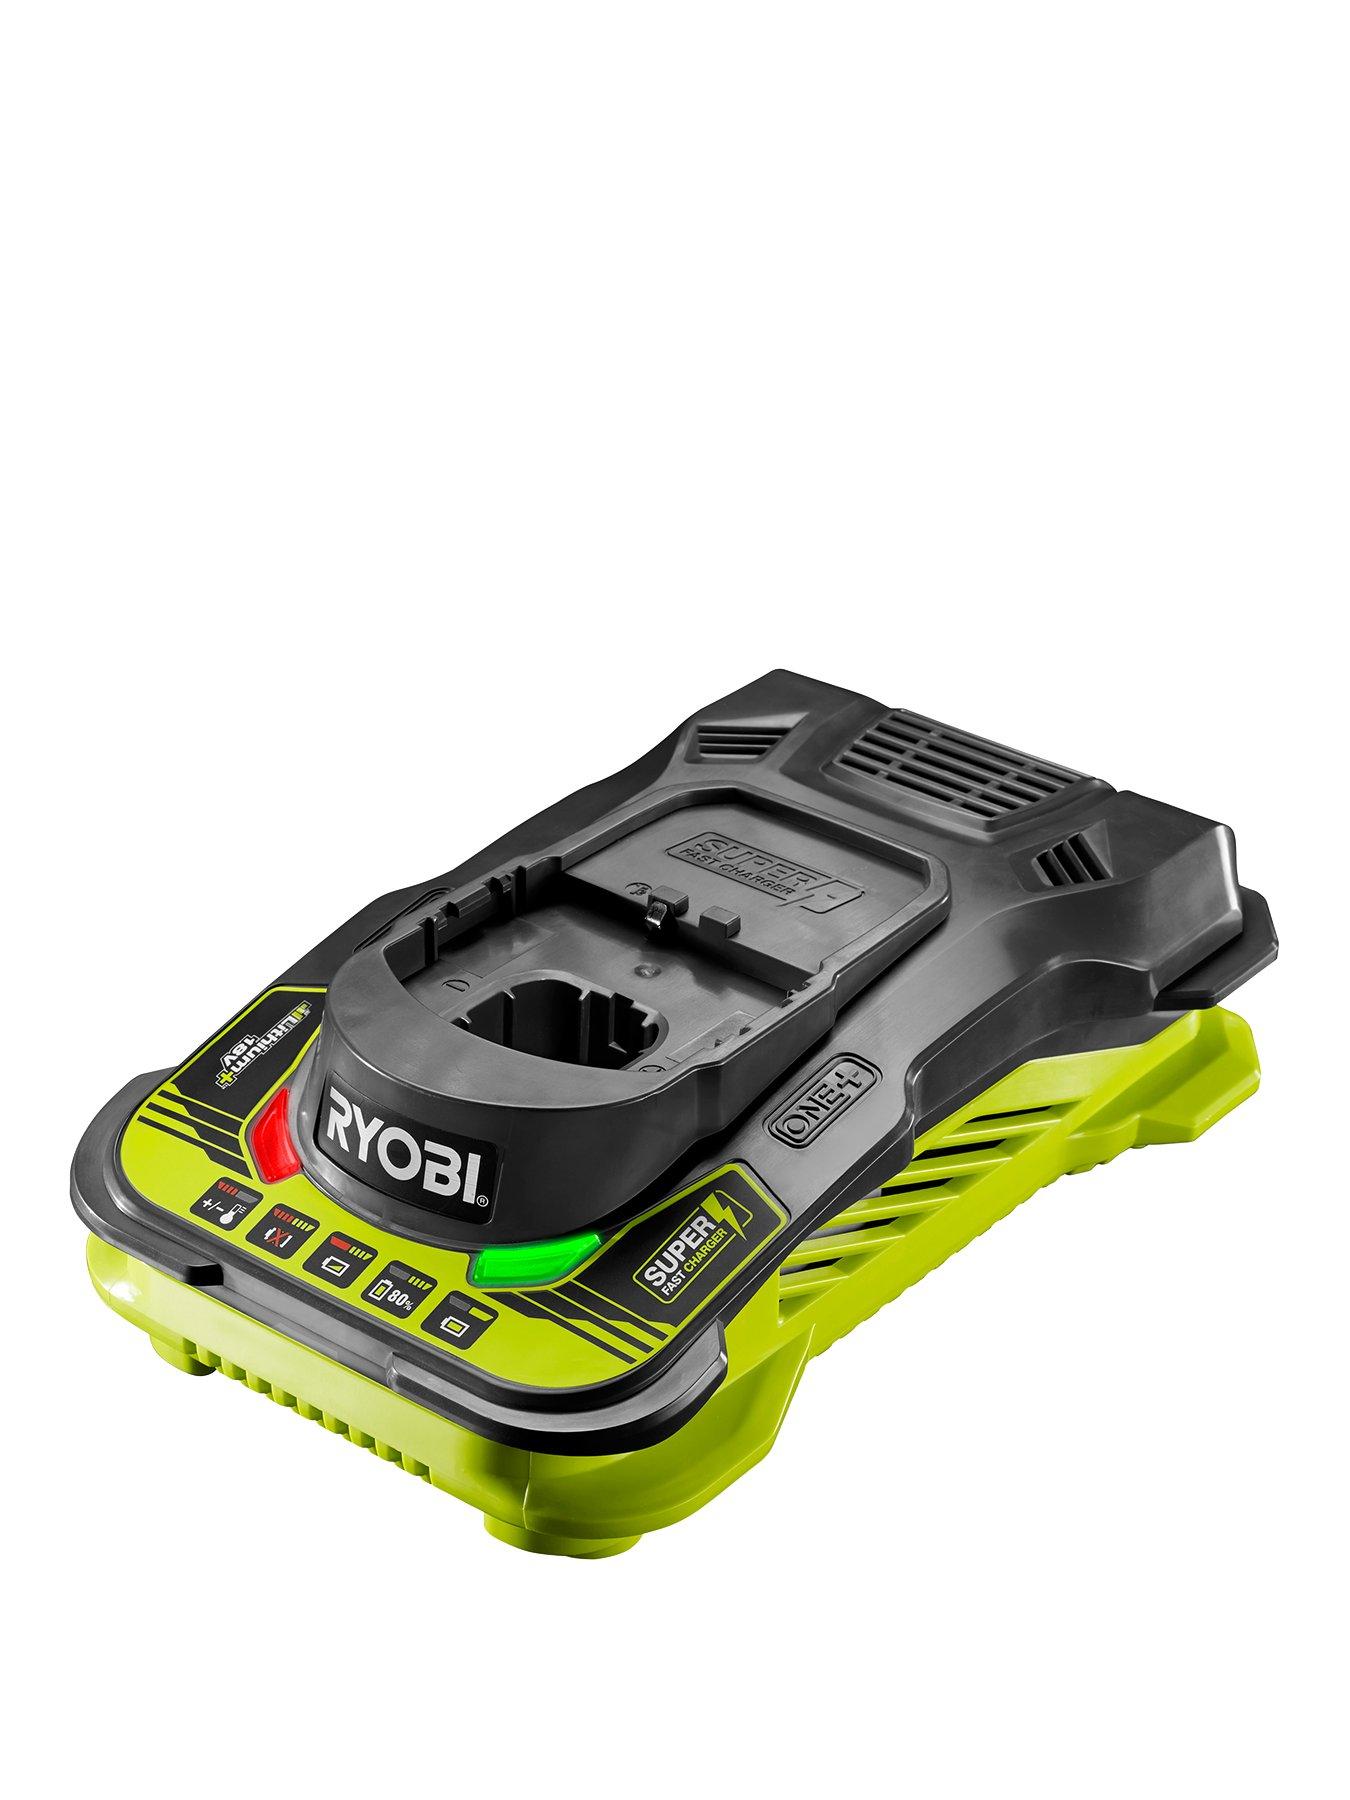 Ryobi Rc18150 18V One+ 5.0A Battery Charger